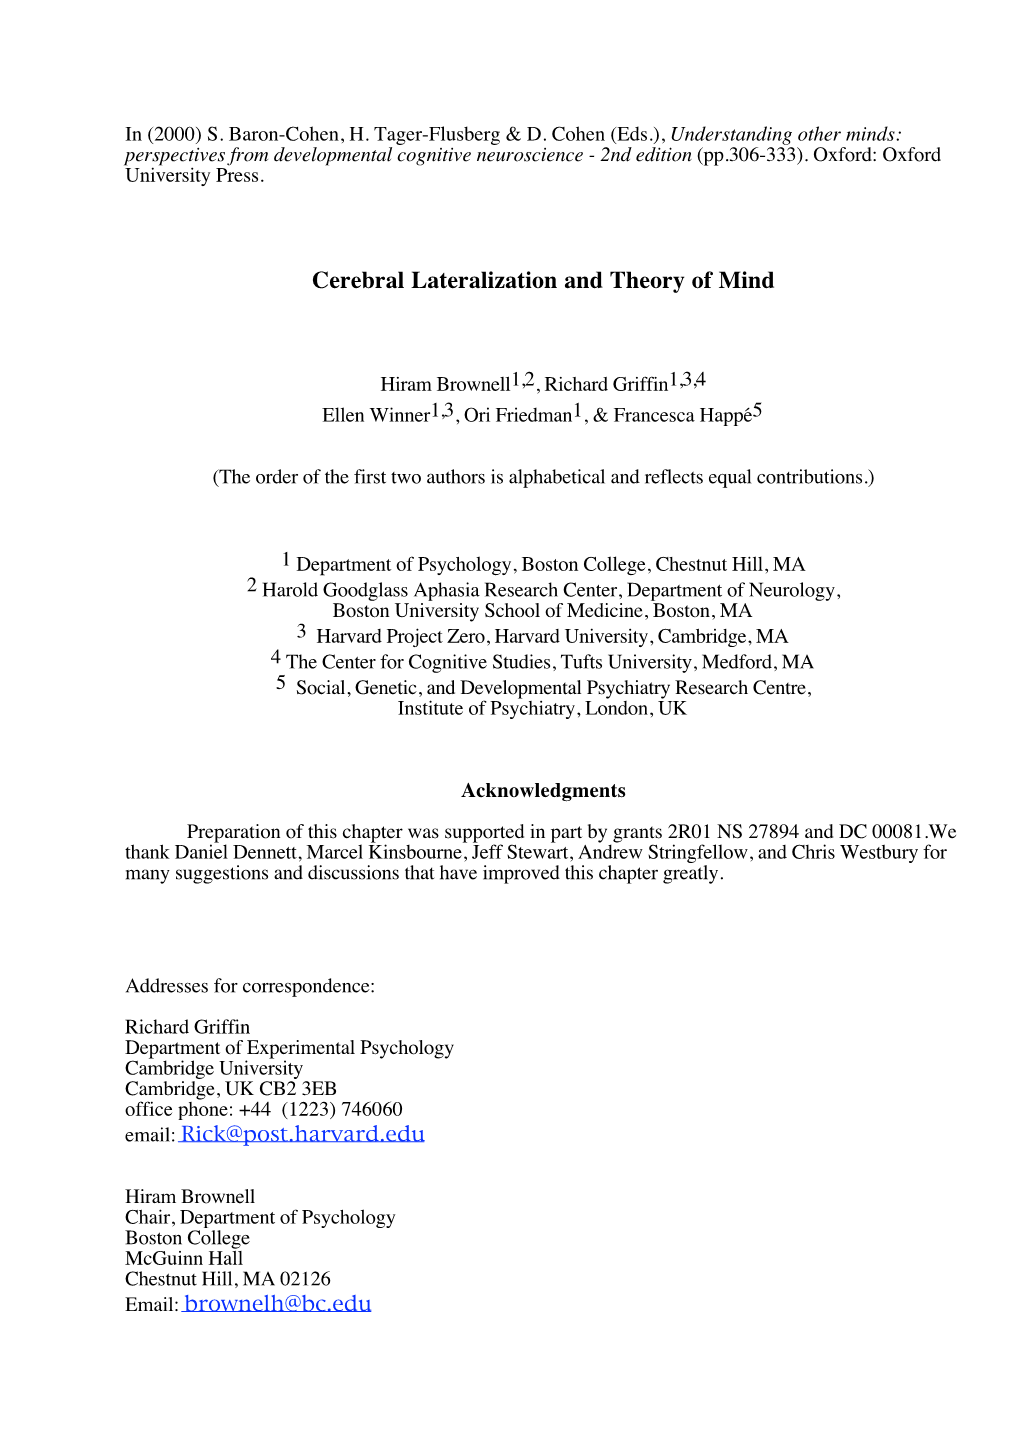 Cerebral Lateralization and Theory of Mind